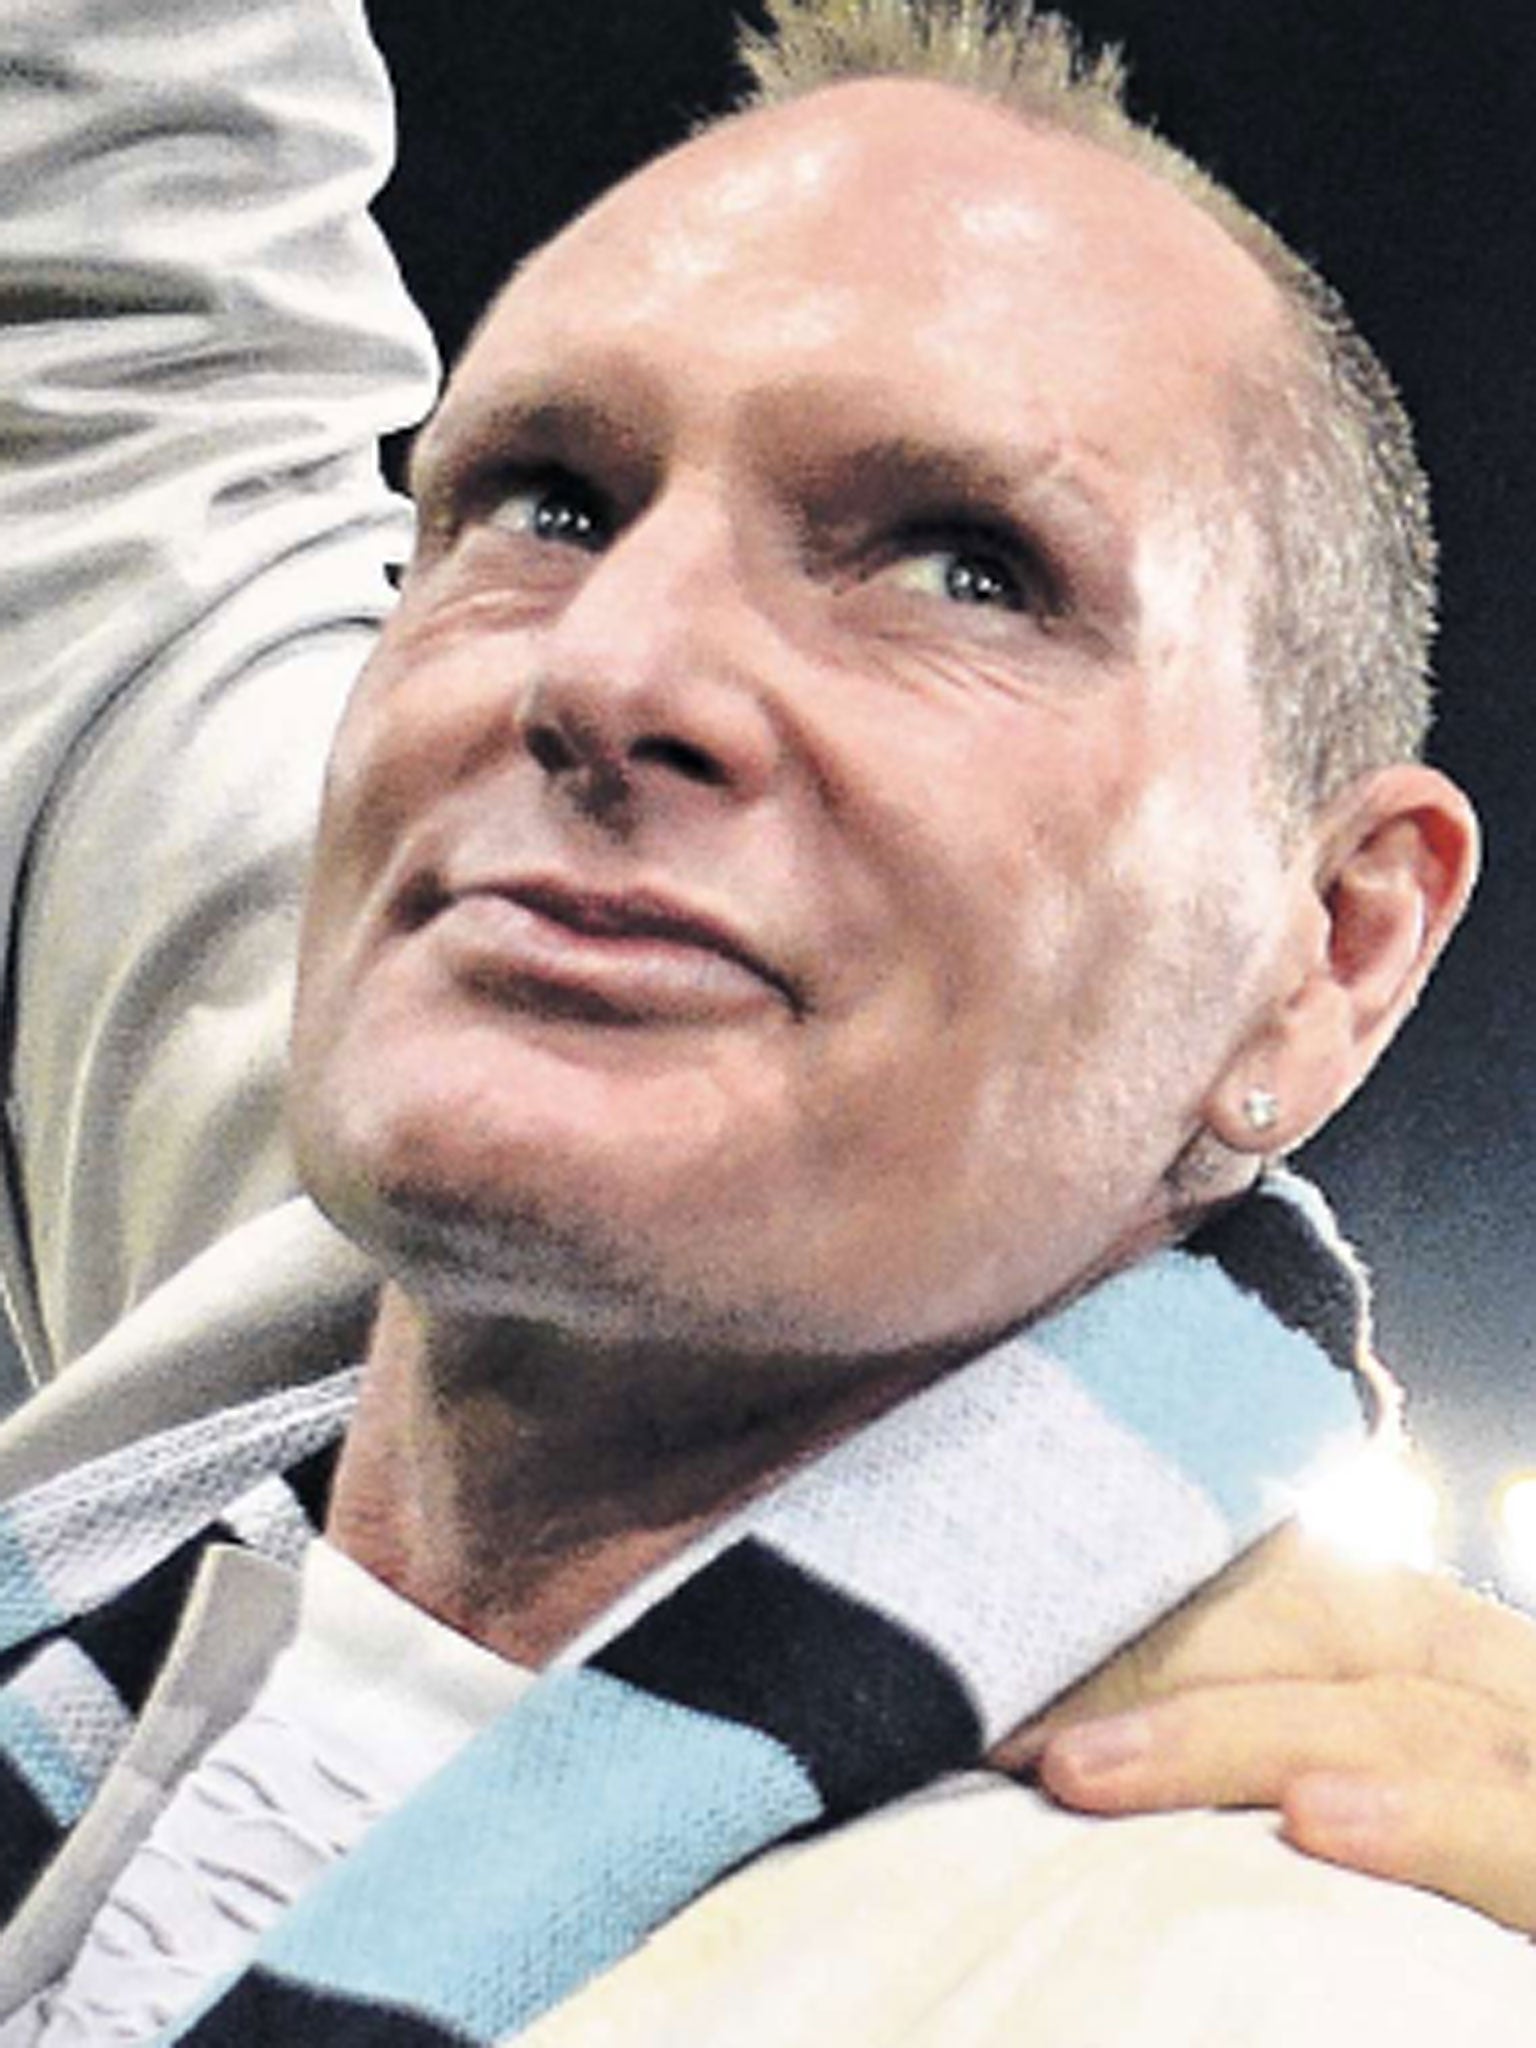 Paul Gascoigne has suffered a long battle with alcoholism